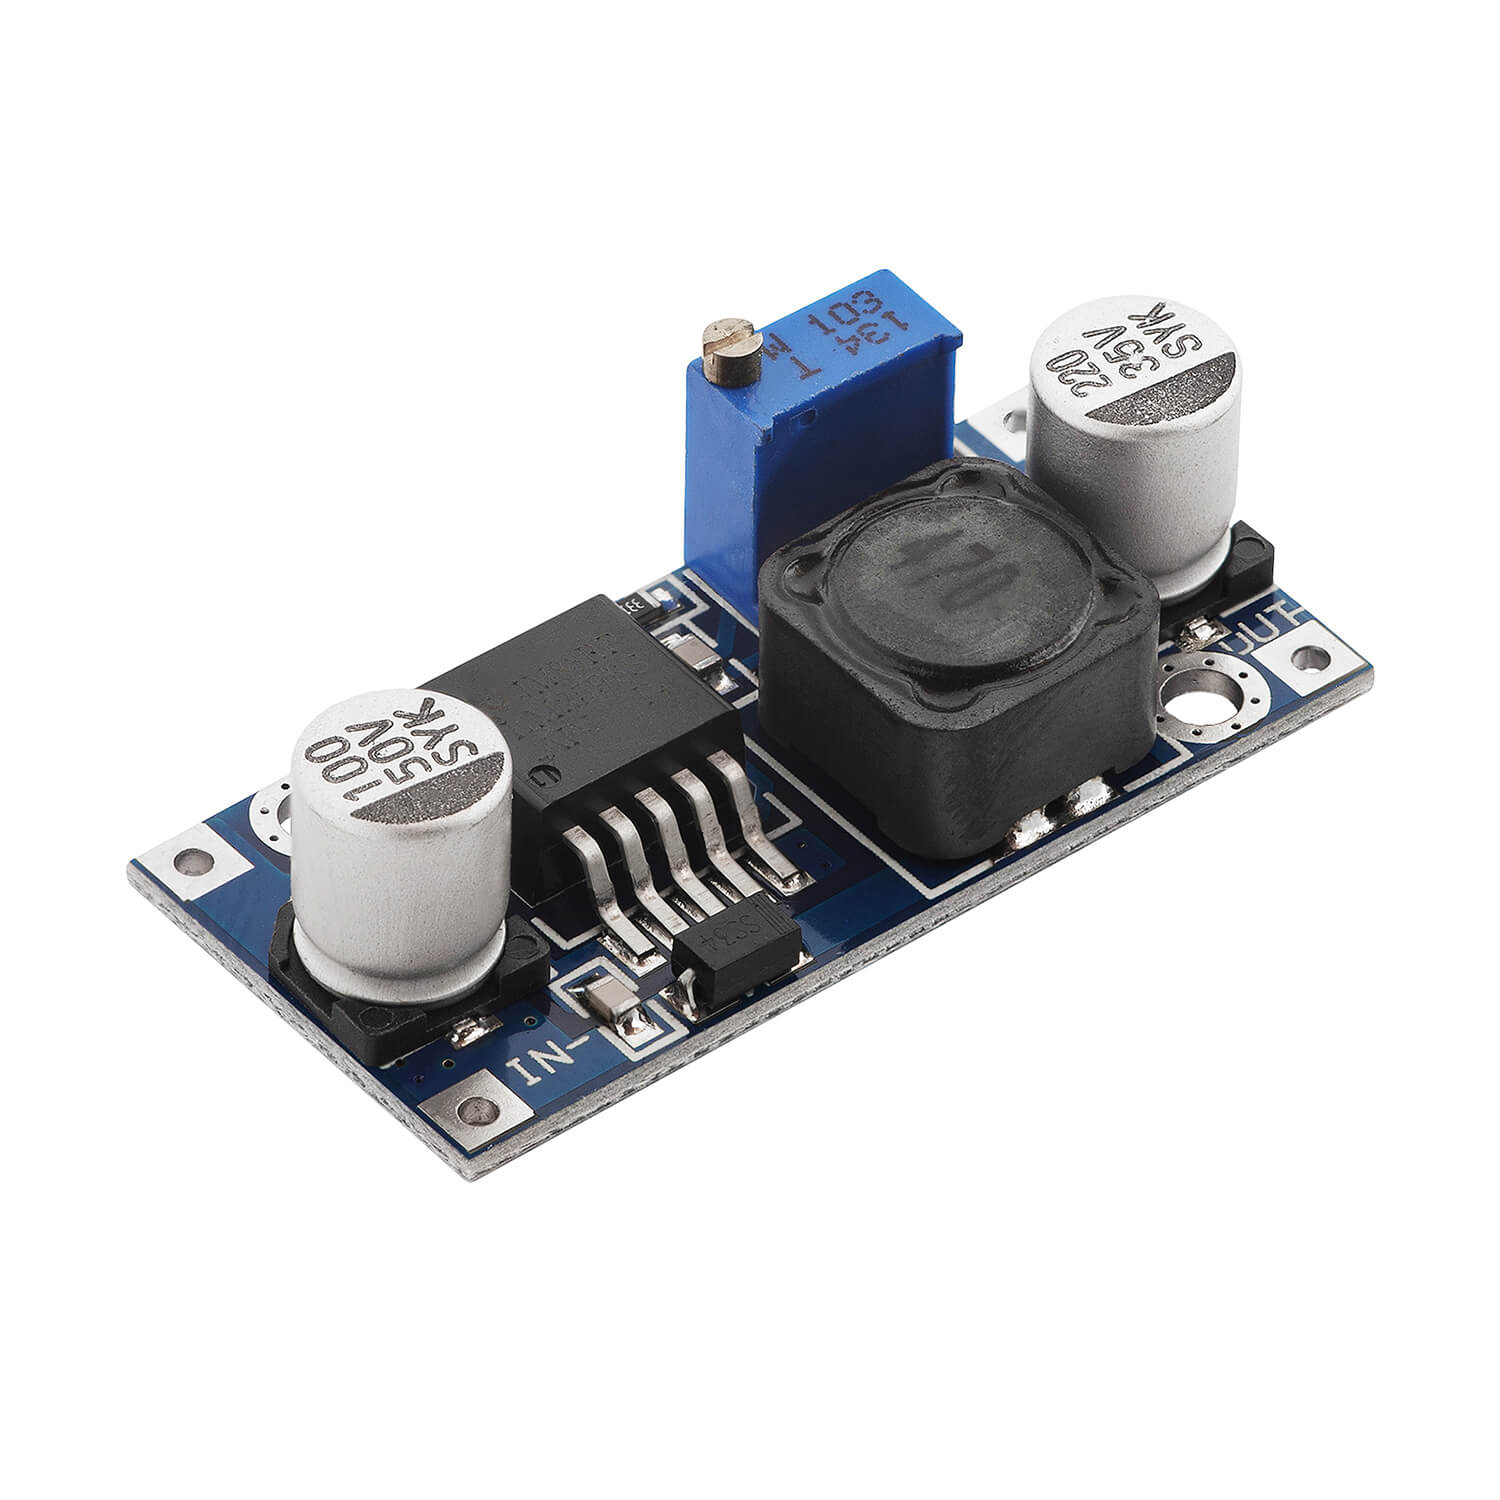 LM2596 LM2596S DC-DC Step-Down Power Supply Module